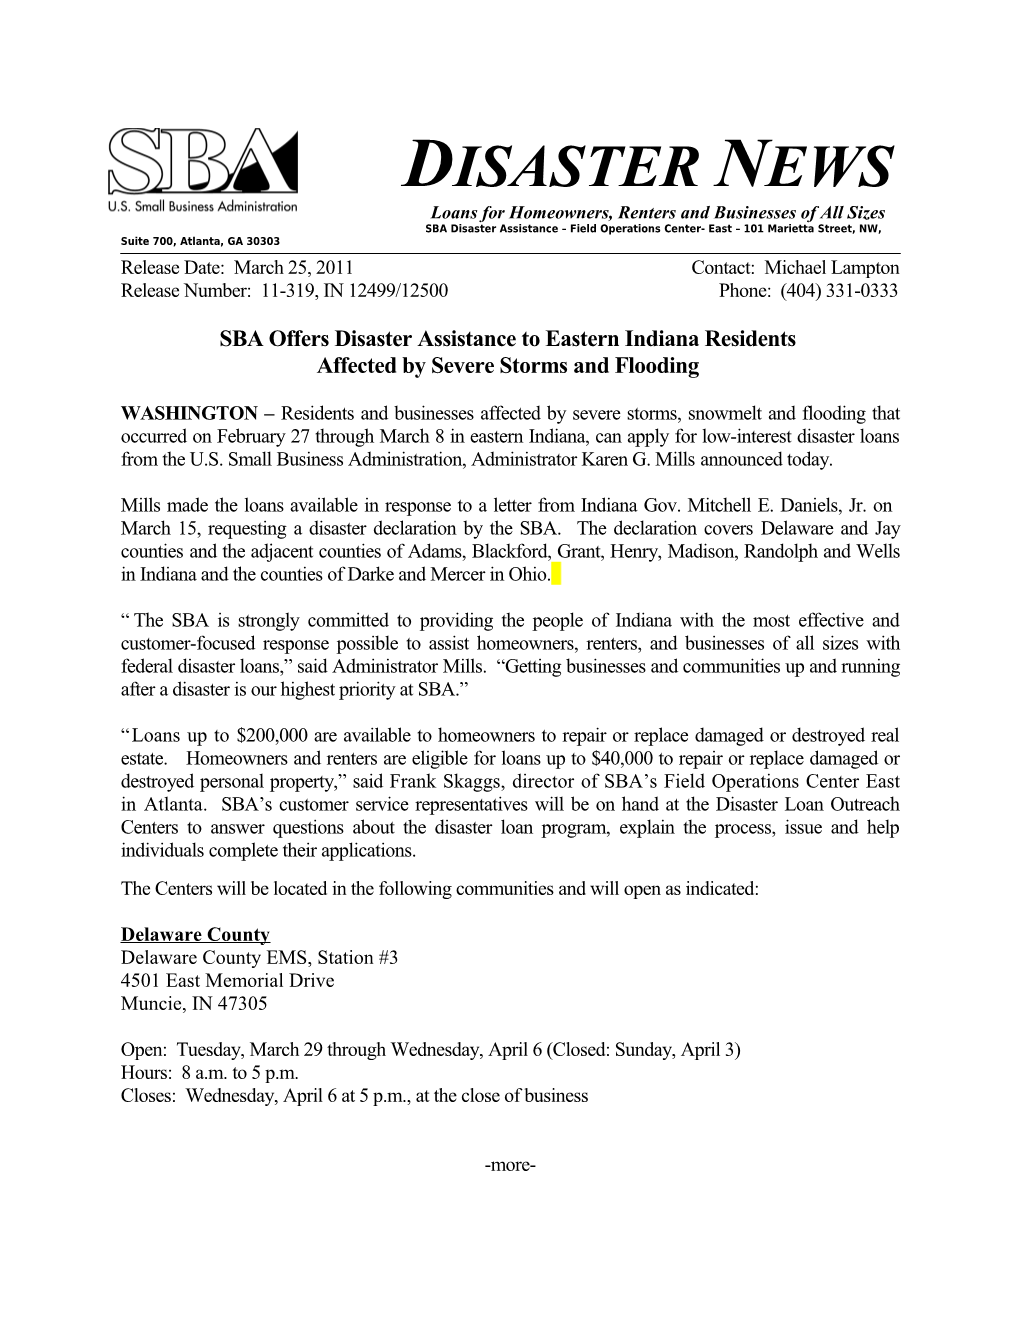 SBA Offers Disaster Assistance Toeastern Indiana Residents